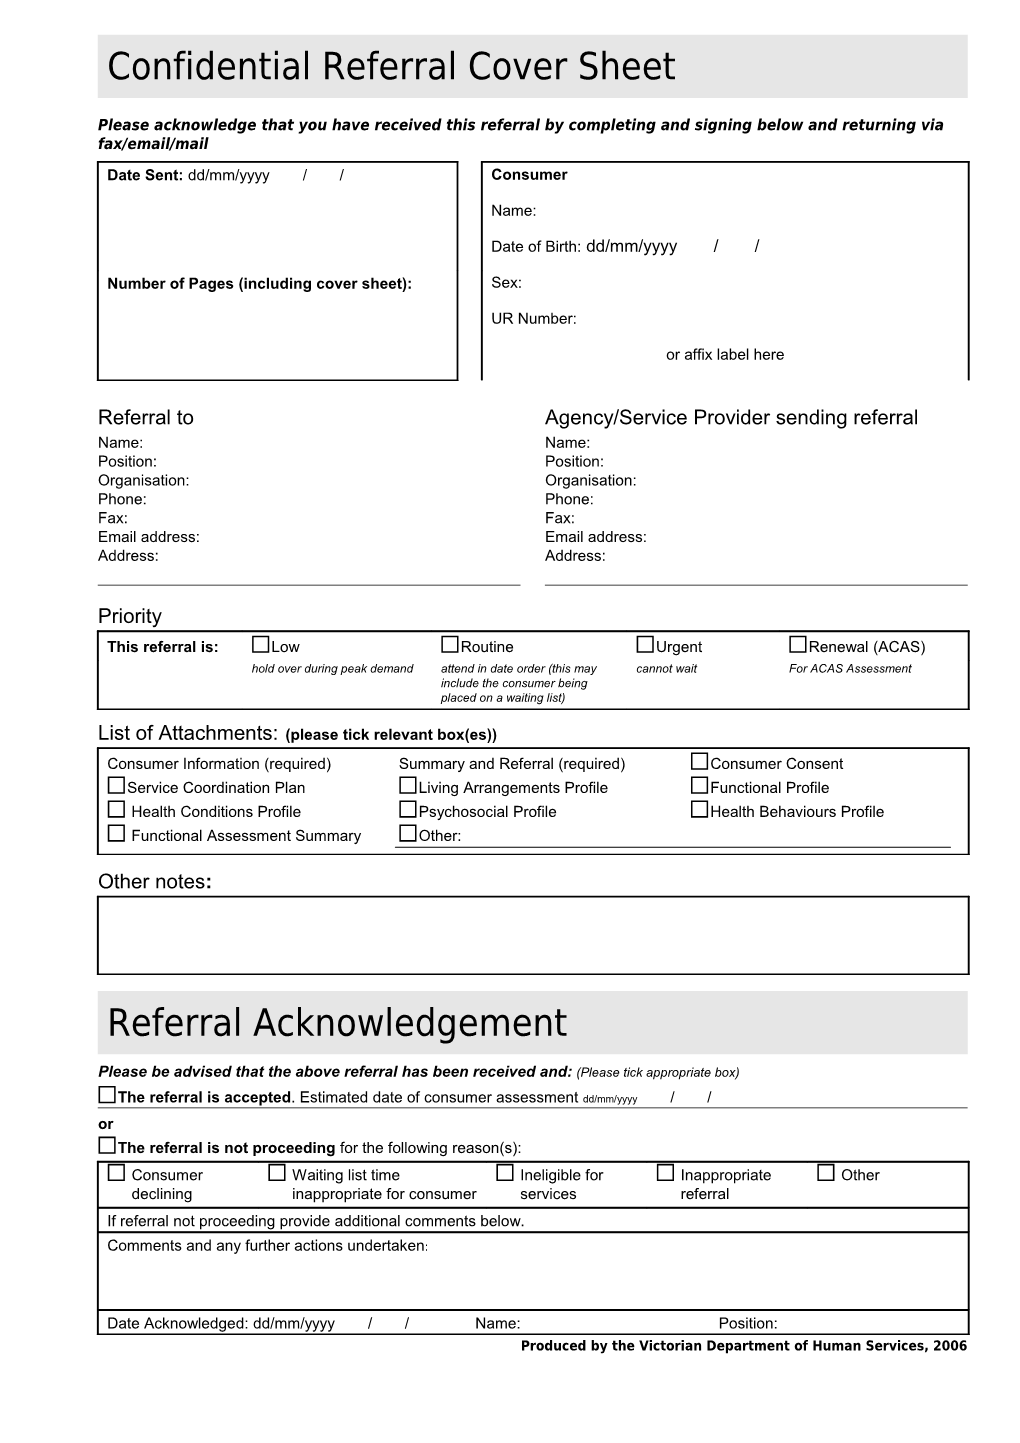 Confidential Referral Cover Sheet